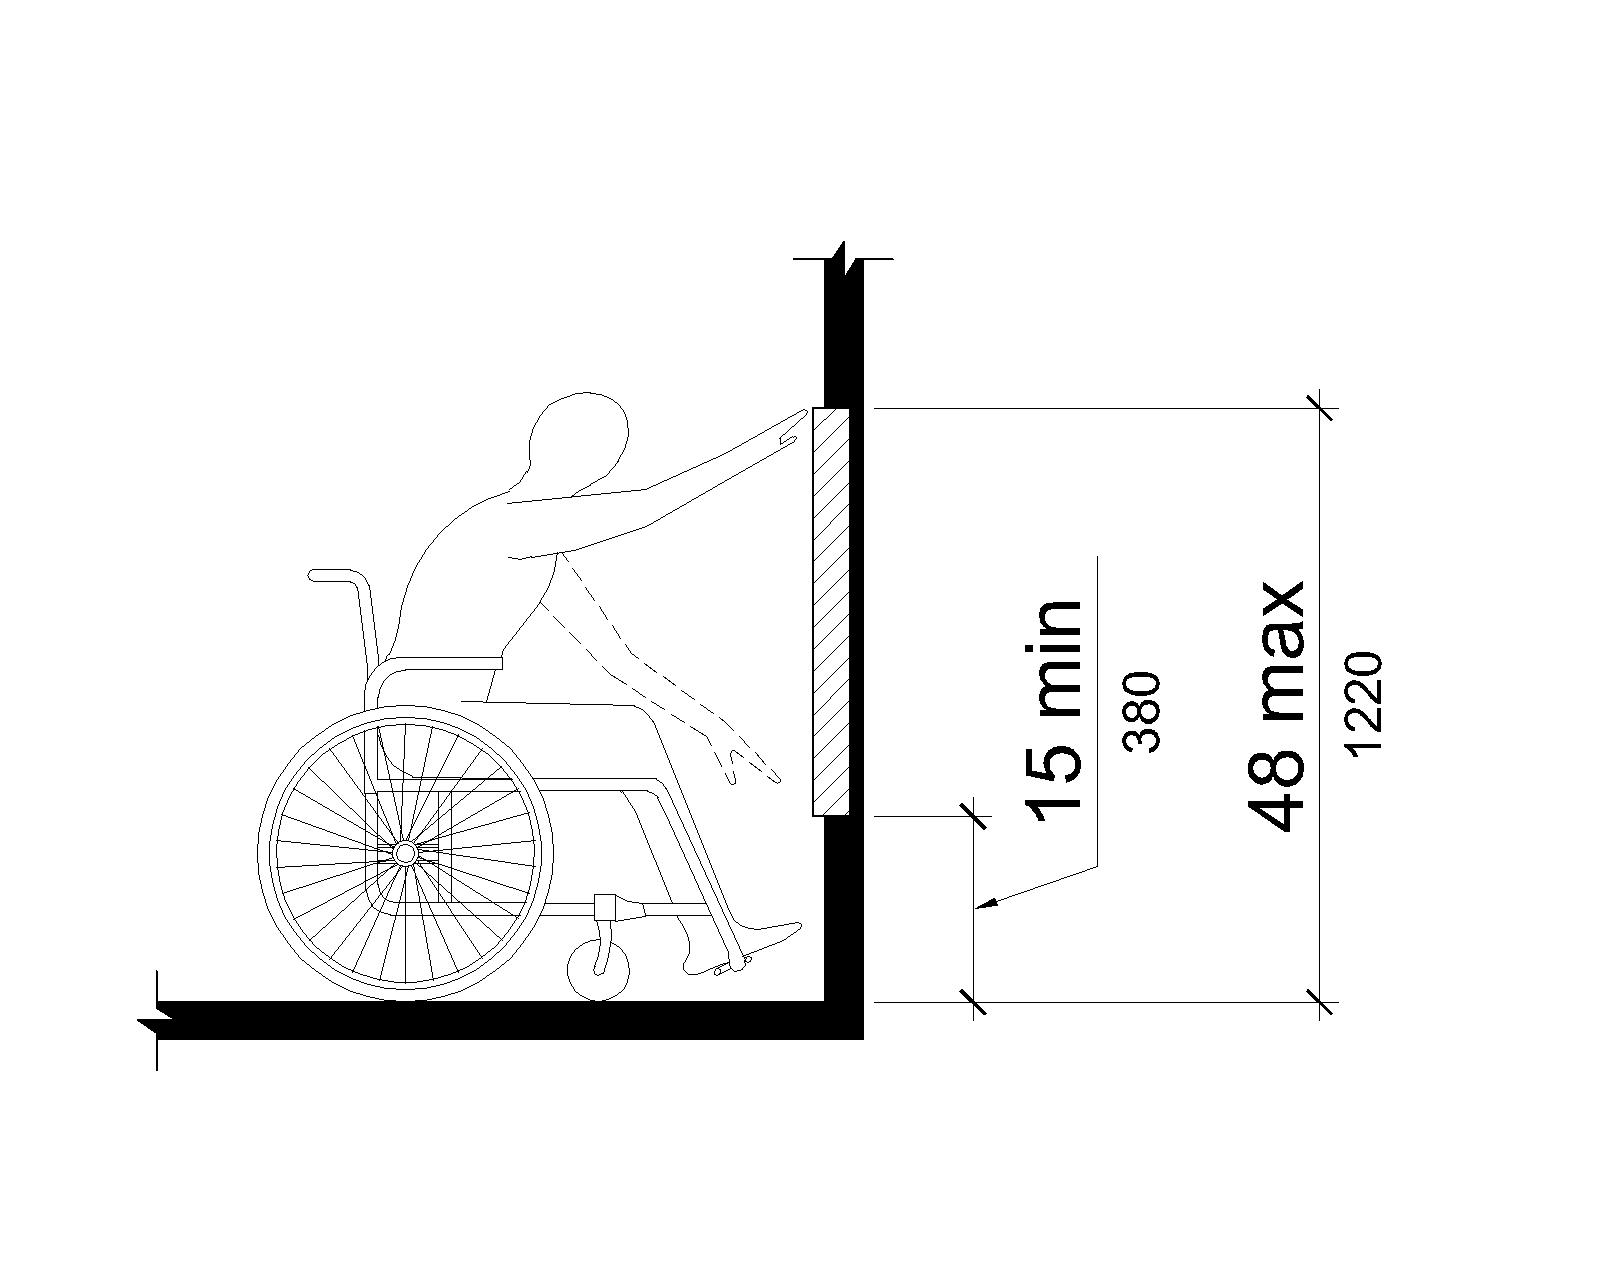 A side view is shown of a person suing a wheelchair reaching toward a wall. The lowest vertical reach point is 15 inches (380 mm) minimum and the highest is 48 inches (1220 mm) maximum.